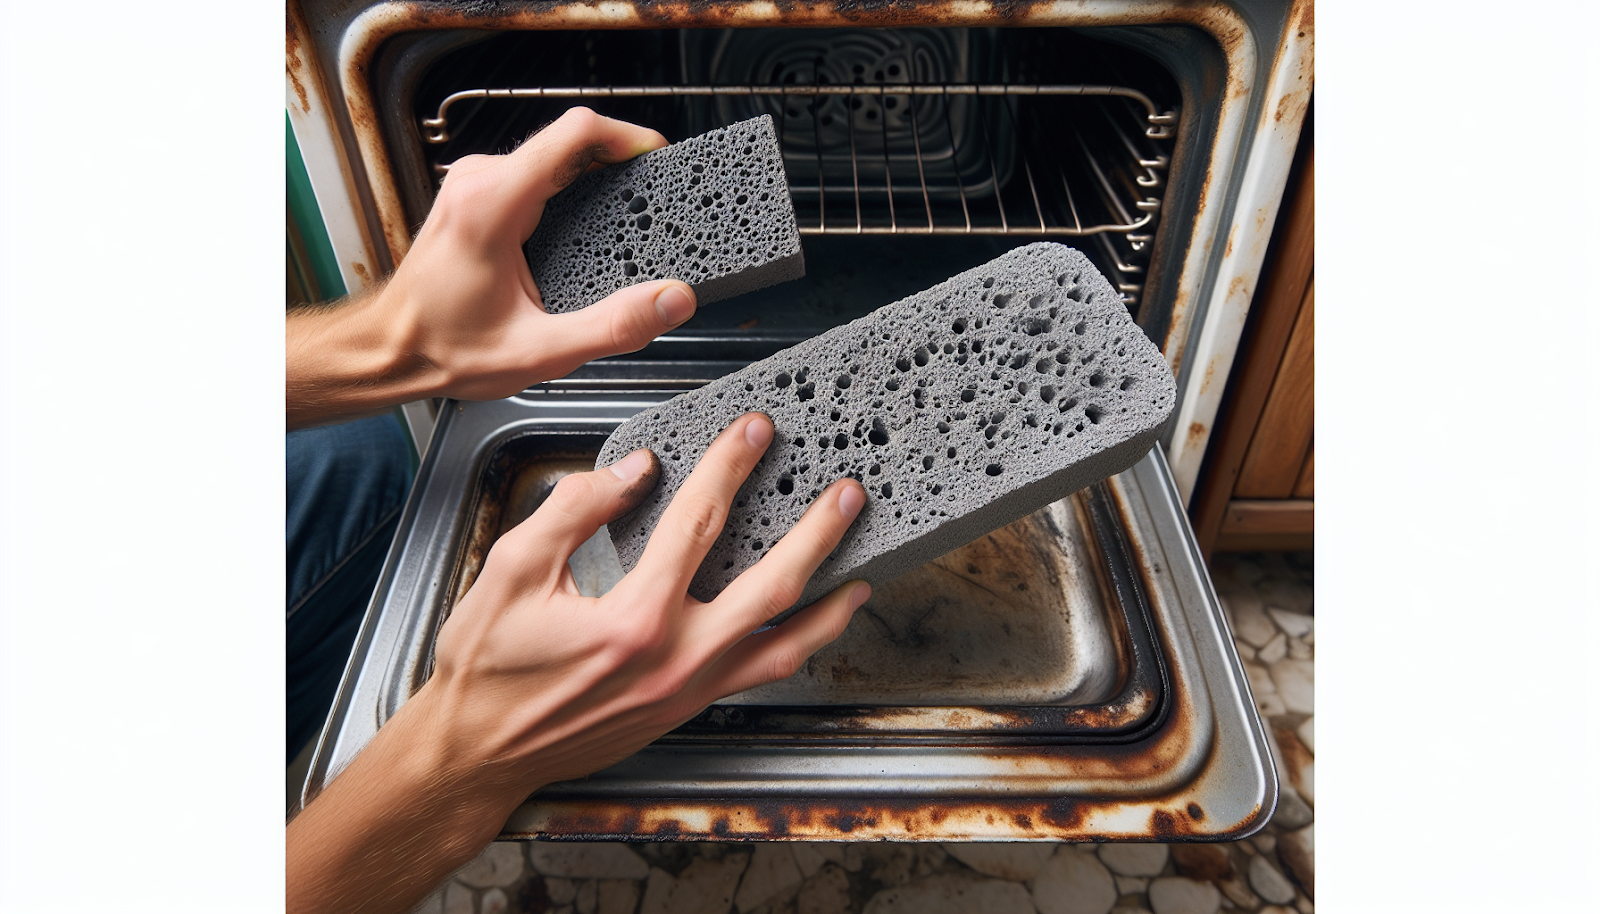 Using pumice stone to remove oven residues